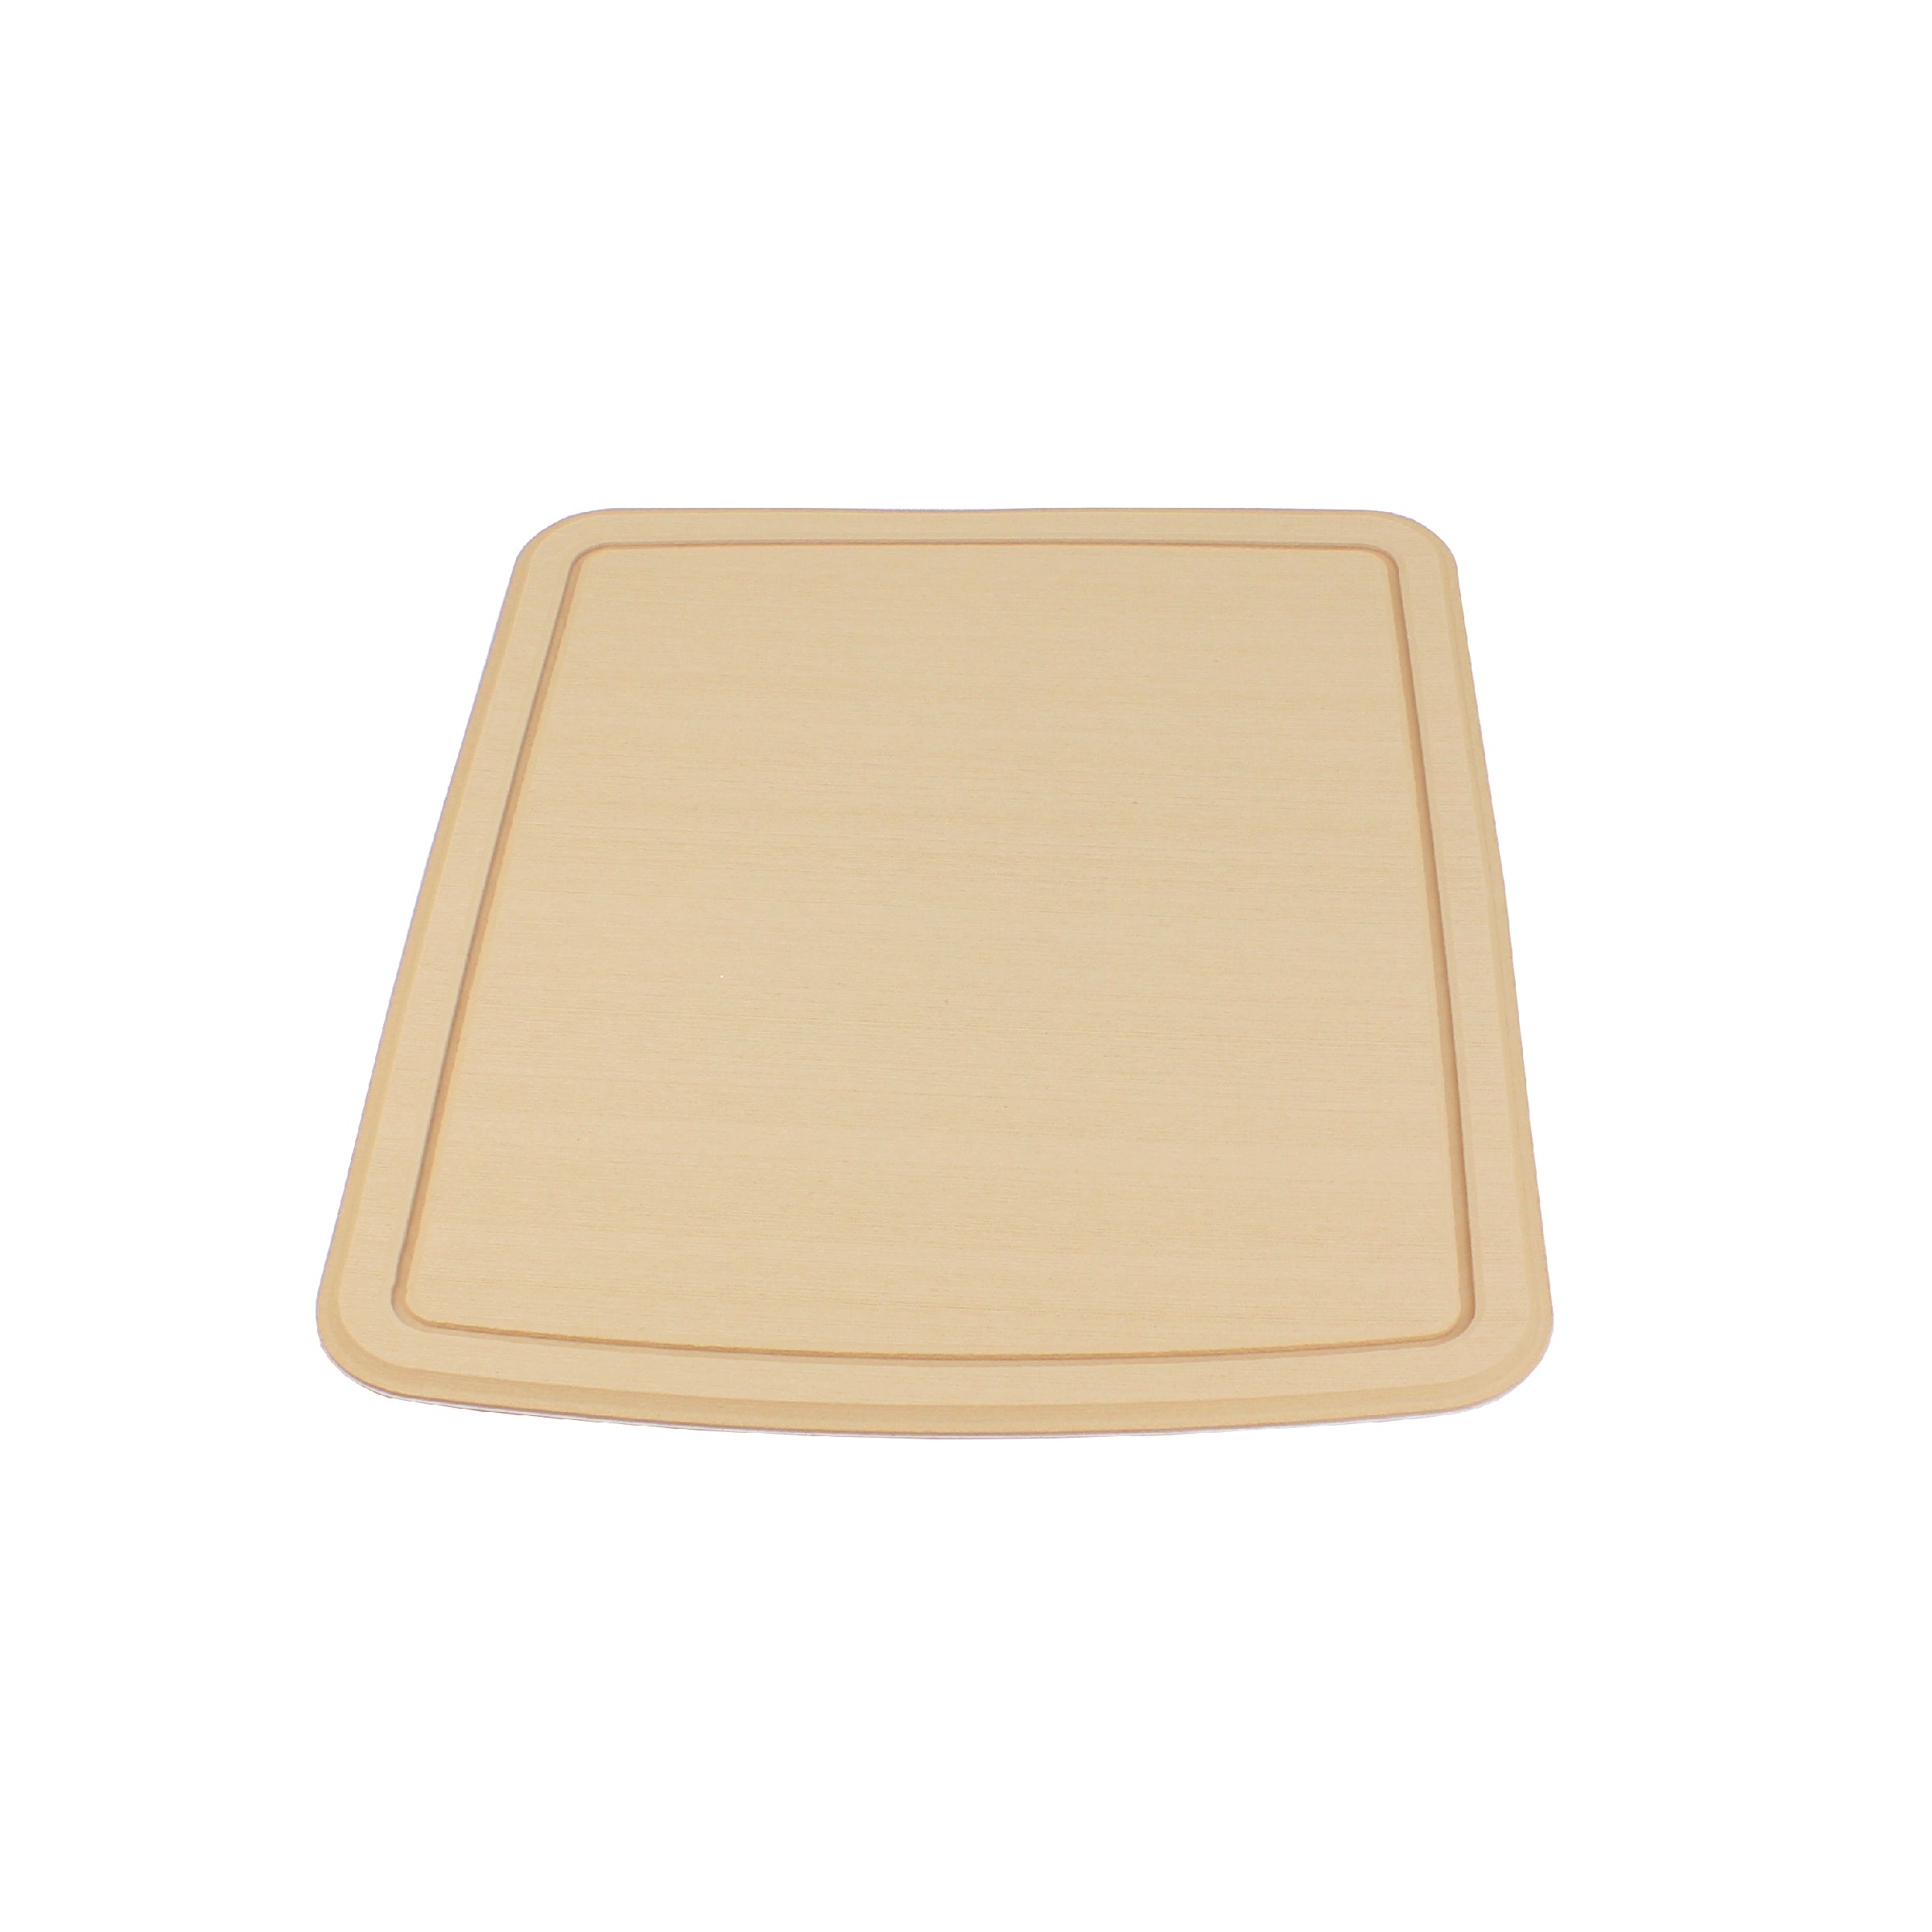 Party Boat Table Center Foam Saddle Mats | ITC Shop Now